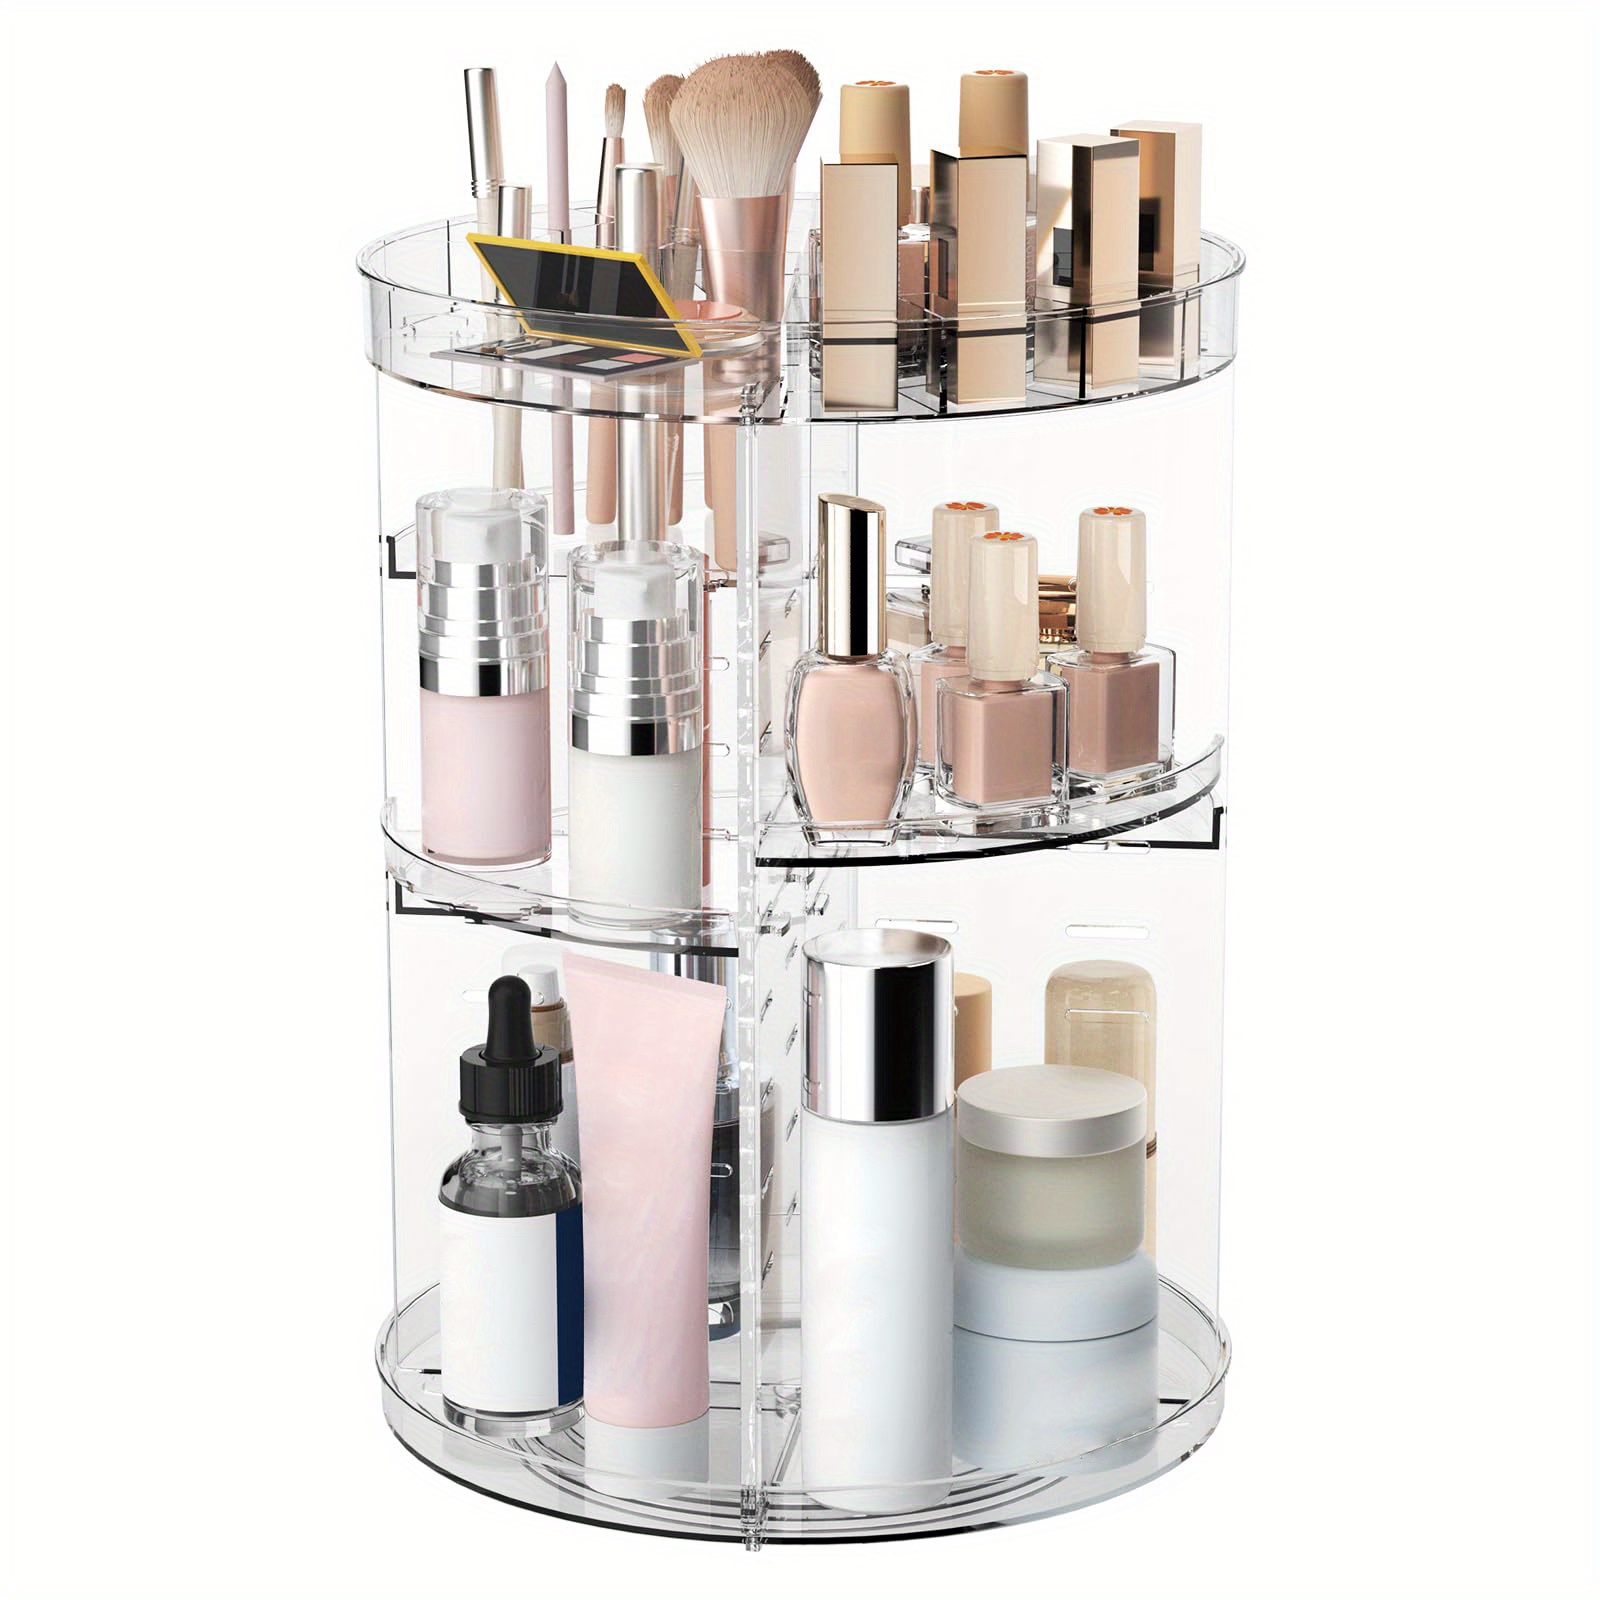 

360° Rotating Makeup Organizer With 8 Adjustable Layers - Spinning Cosmetic & Skincare Storage Shelf, Scent-free Pvc, Perfect For Vanity, Bathroom Countertop Rotating Makeup Brush Storage Case